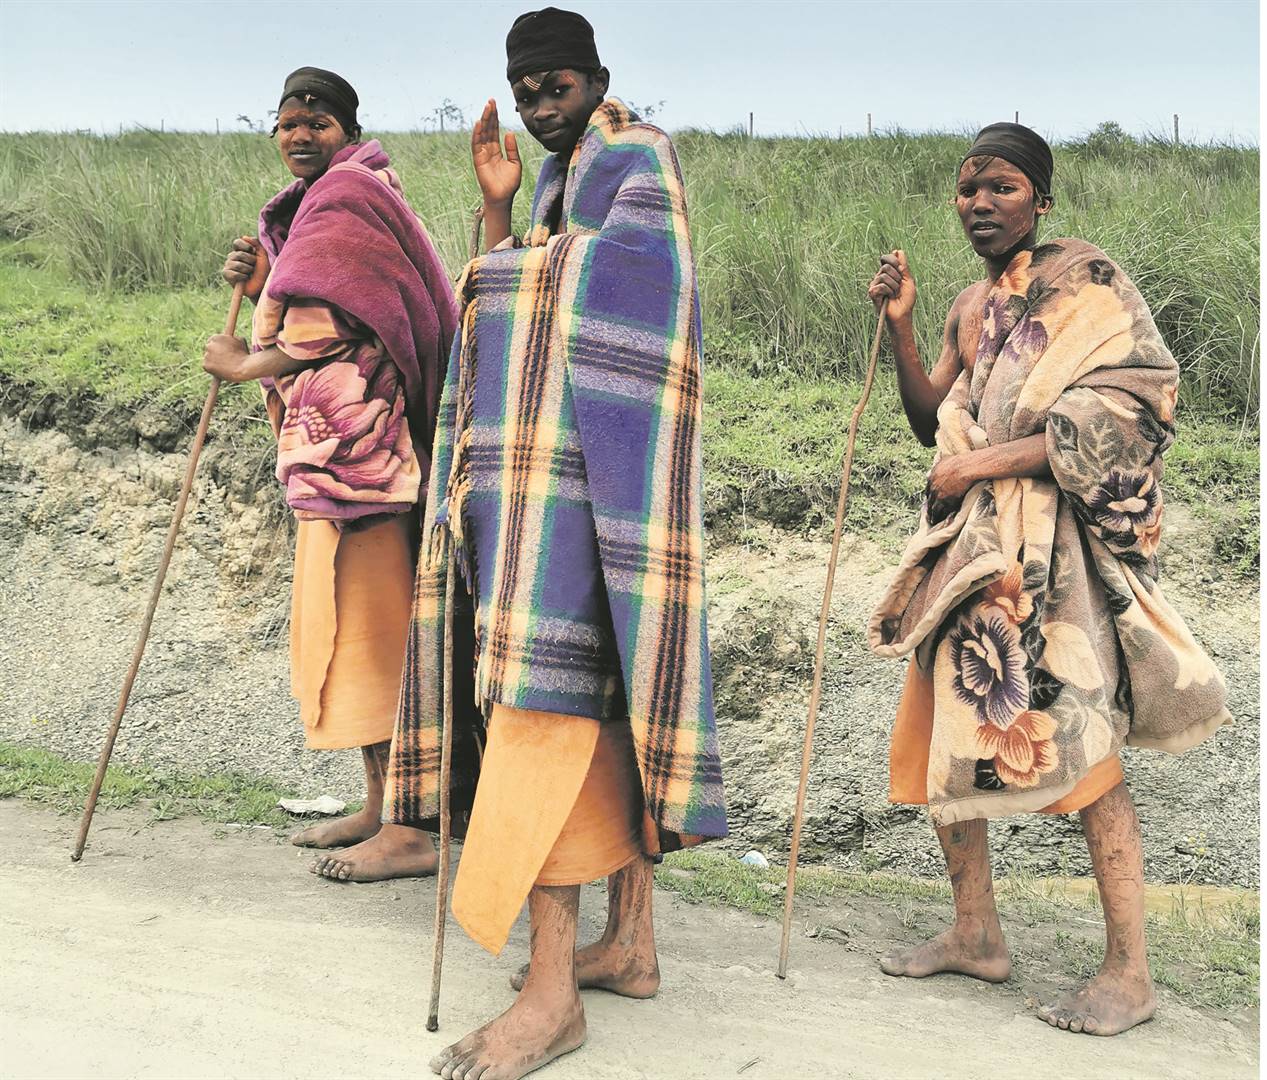 Abakhwetha in traditional initiation garb. Picture: Lubabalo Ngcukana